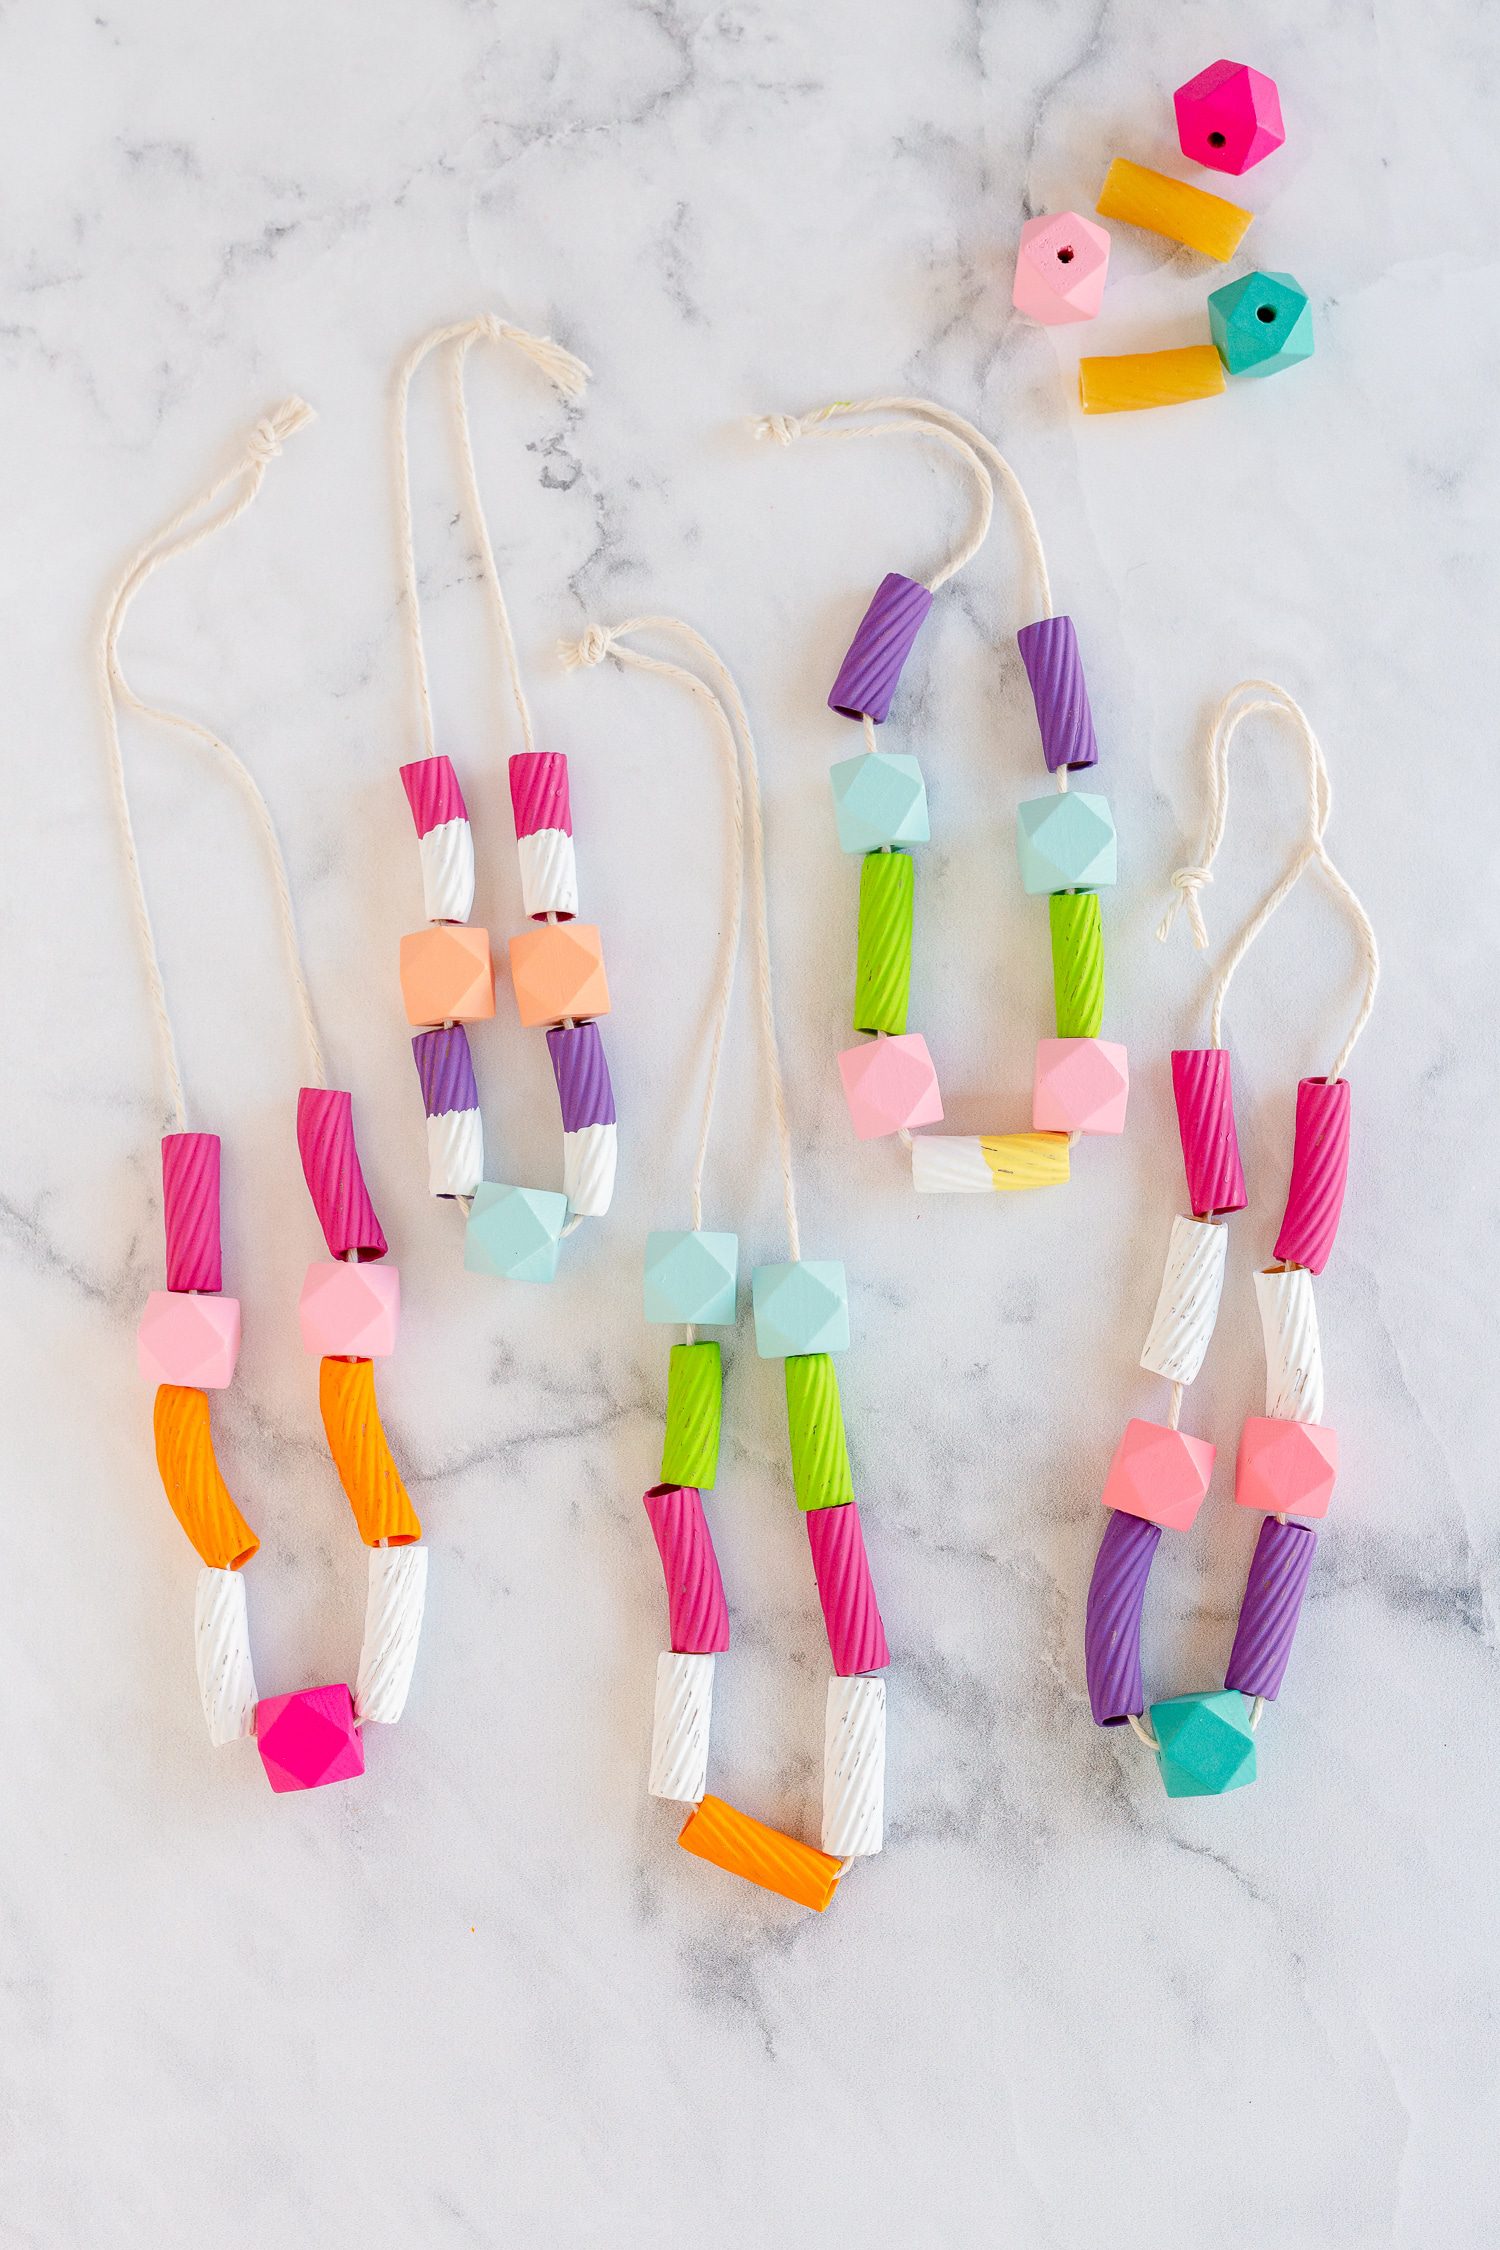 This image of an easy art project for kids shows 5 multi-colored macaroni necklaces made from painted macaroni, string, and some beads.